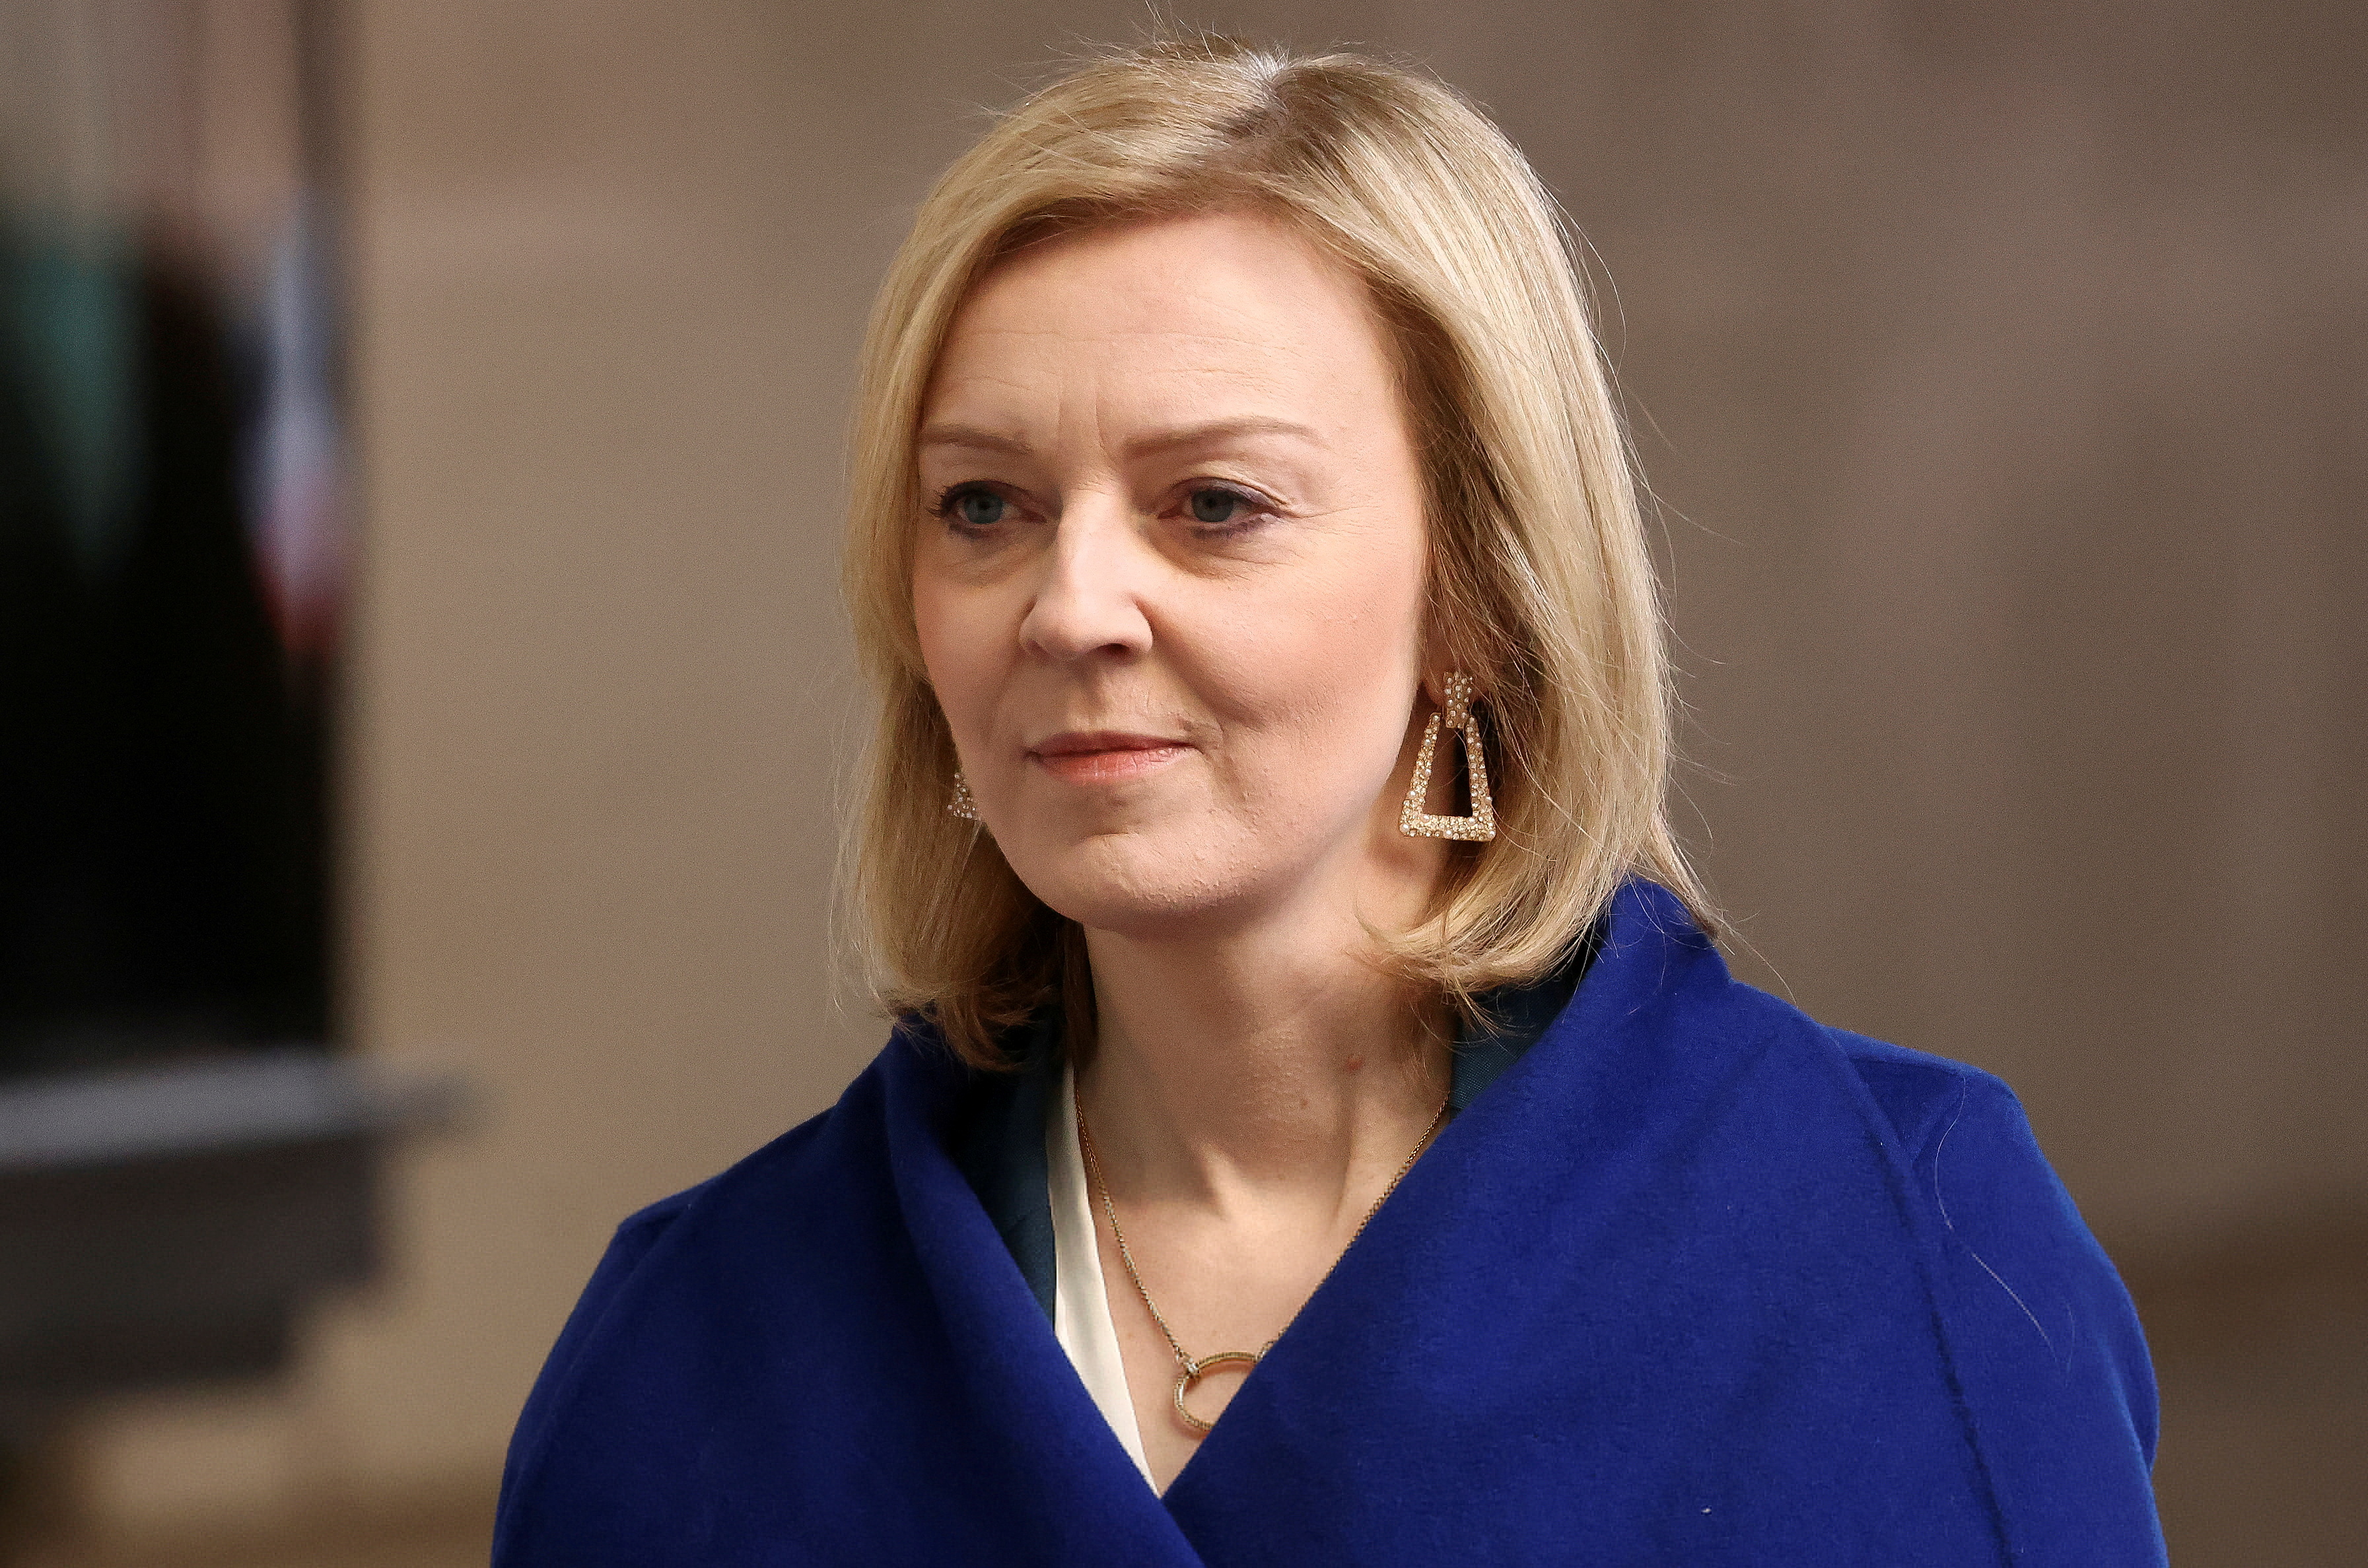 British Foreign Secretary Liz Truss arrives at the BBC headquarters in London